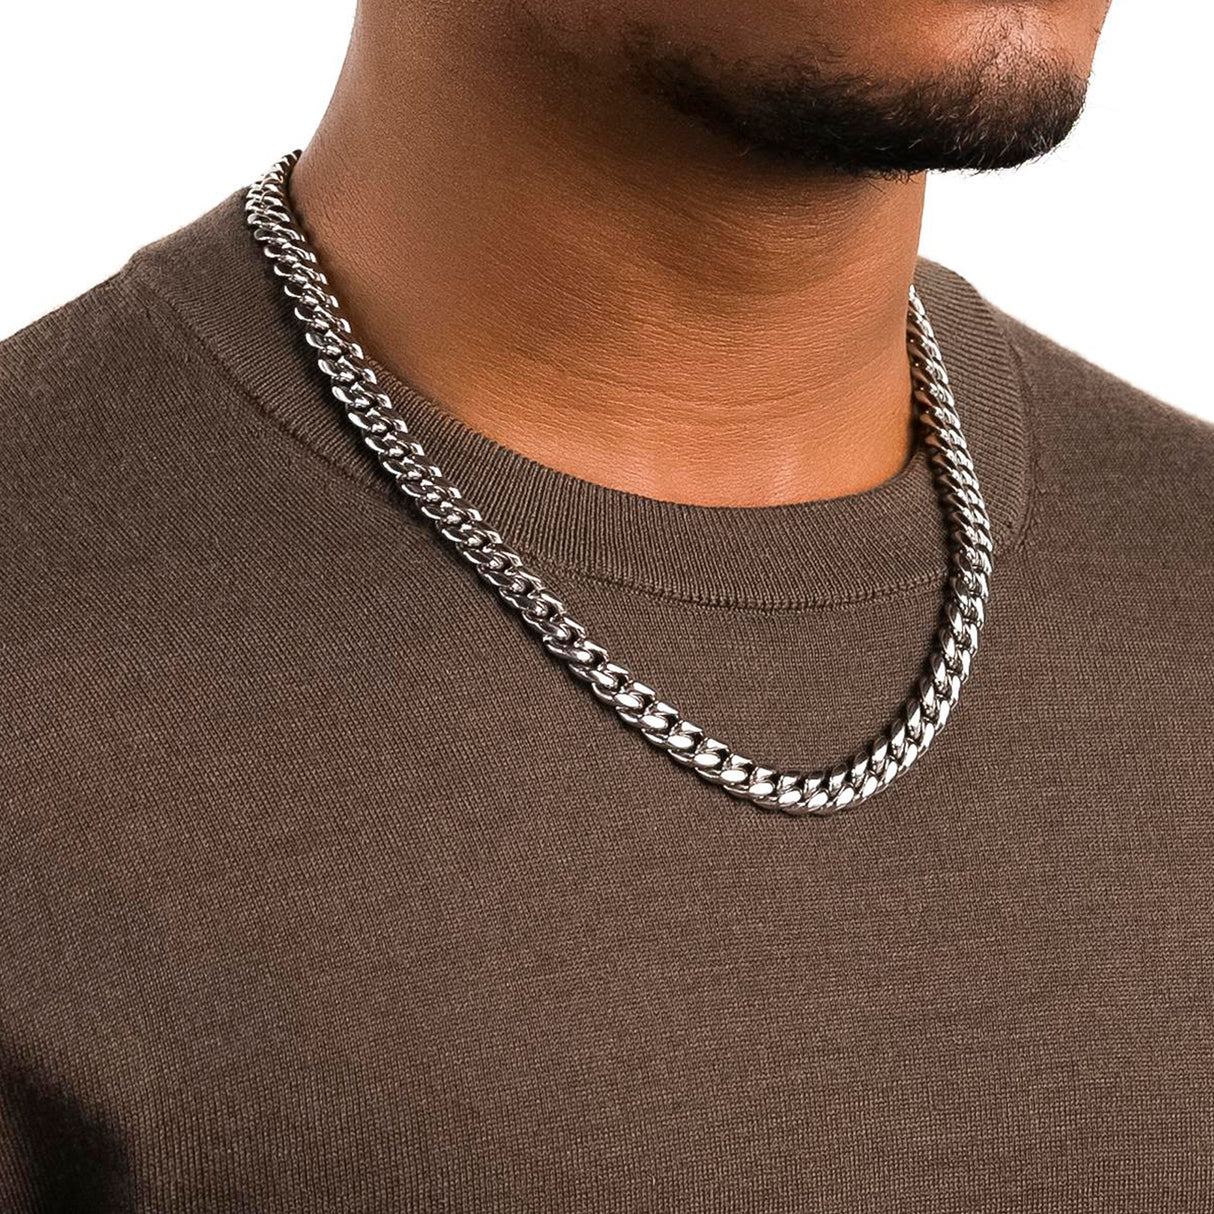 he-gold-gods-mens-jewelry-18k-white-gold-plated-miami-cuban-link-necklace-10mm-22inch